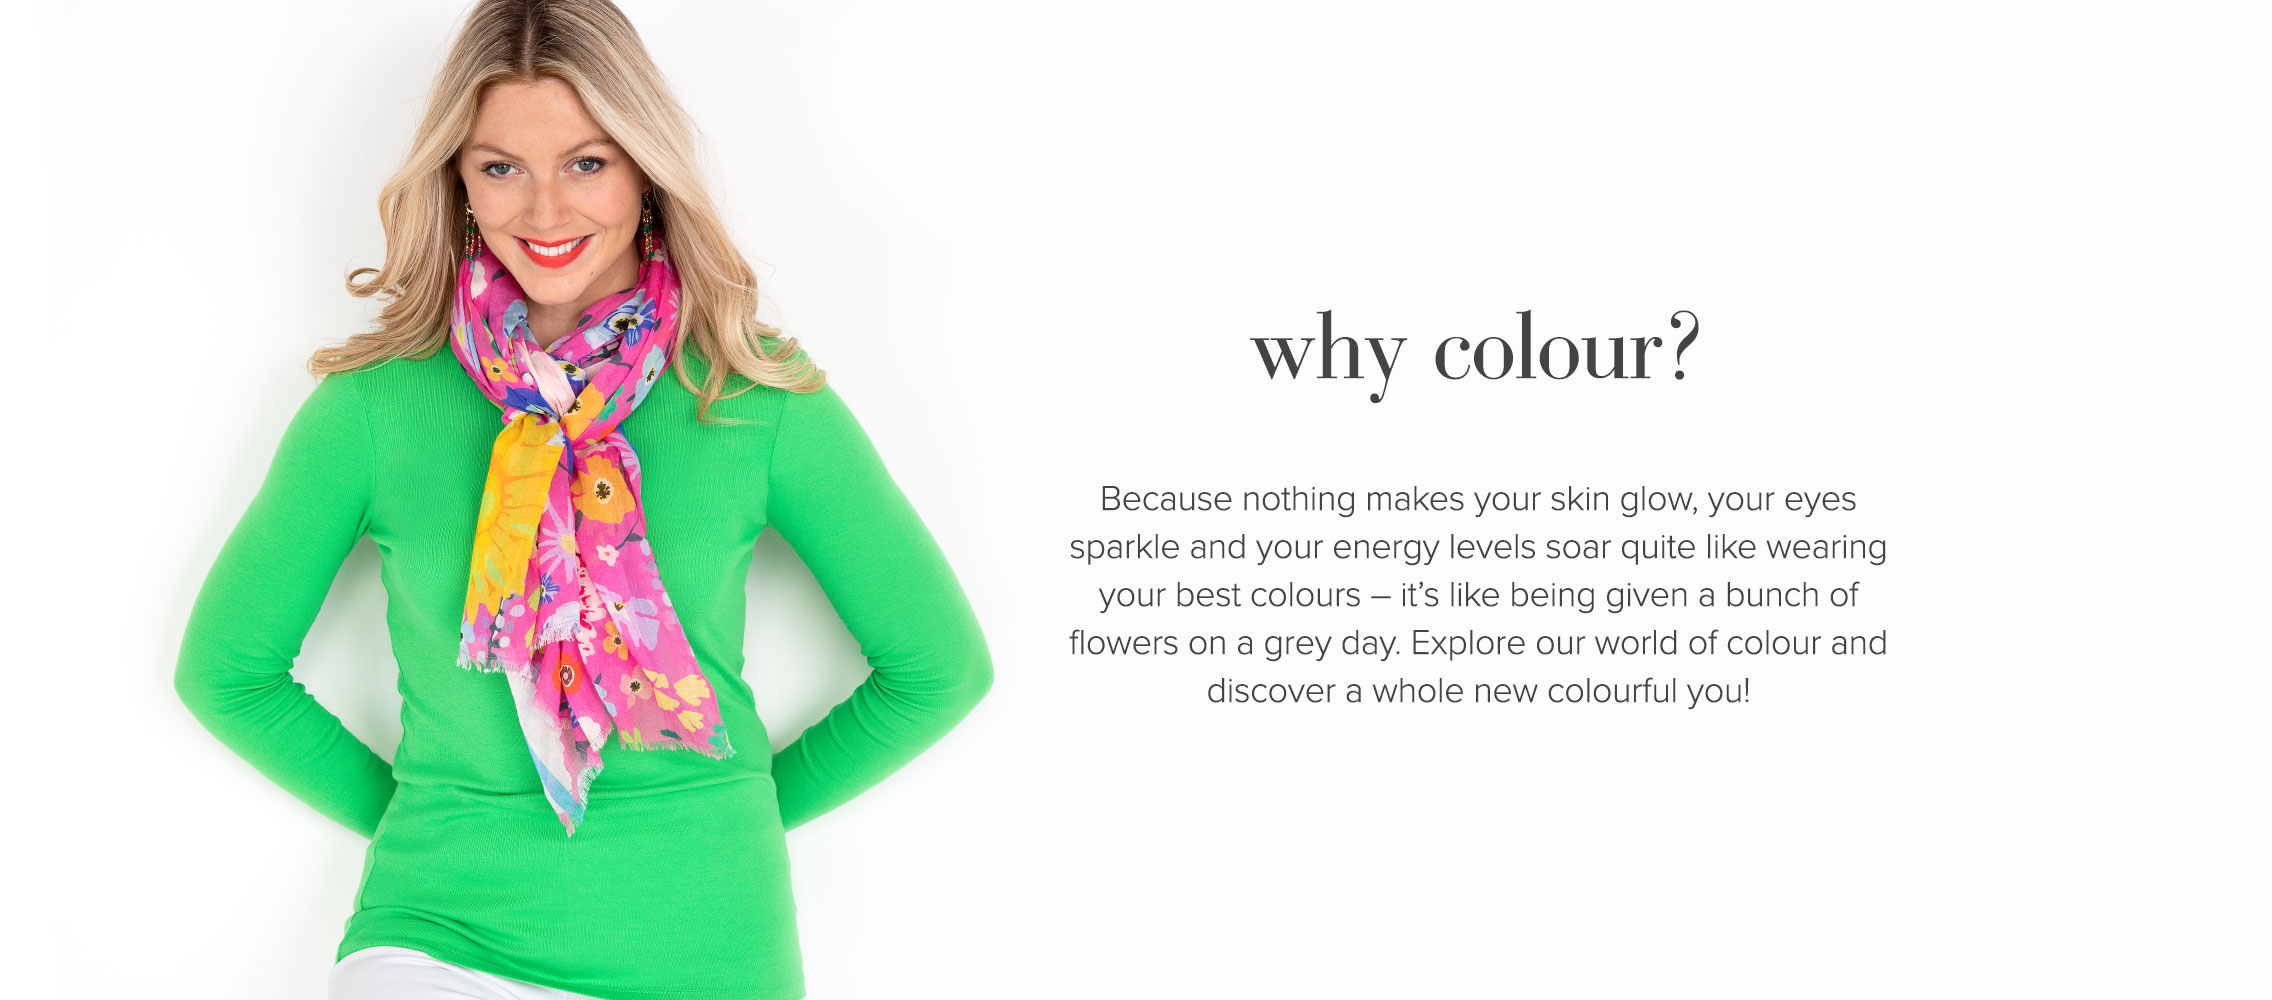 Why colour? Because nothing makes your skin glow, your eyes sparkle and your energy levels soar quite like your best colours. Explore our world of colour and discover a whole new colourful you!